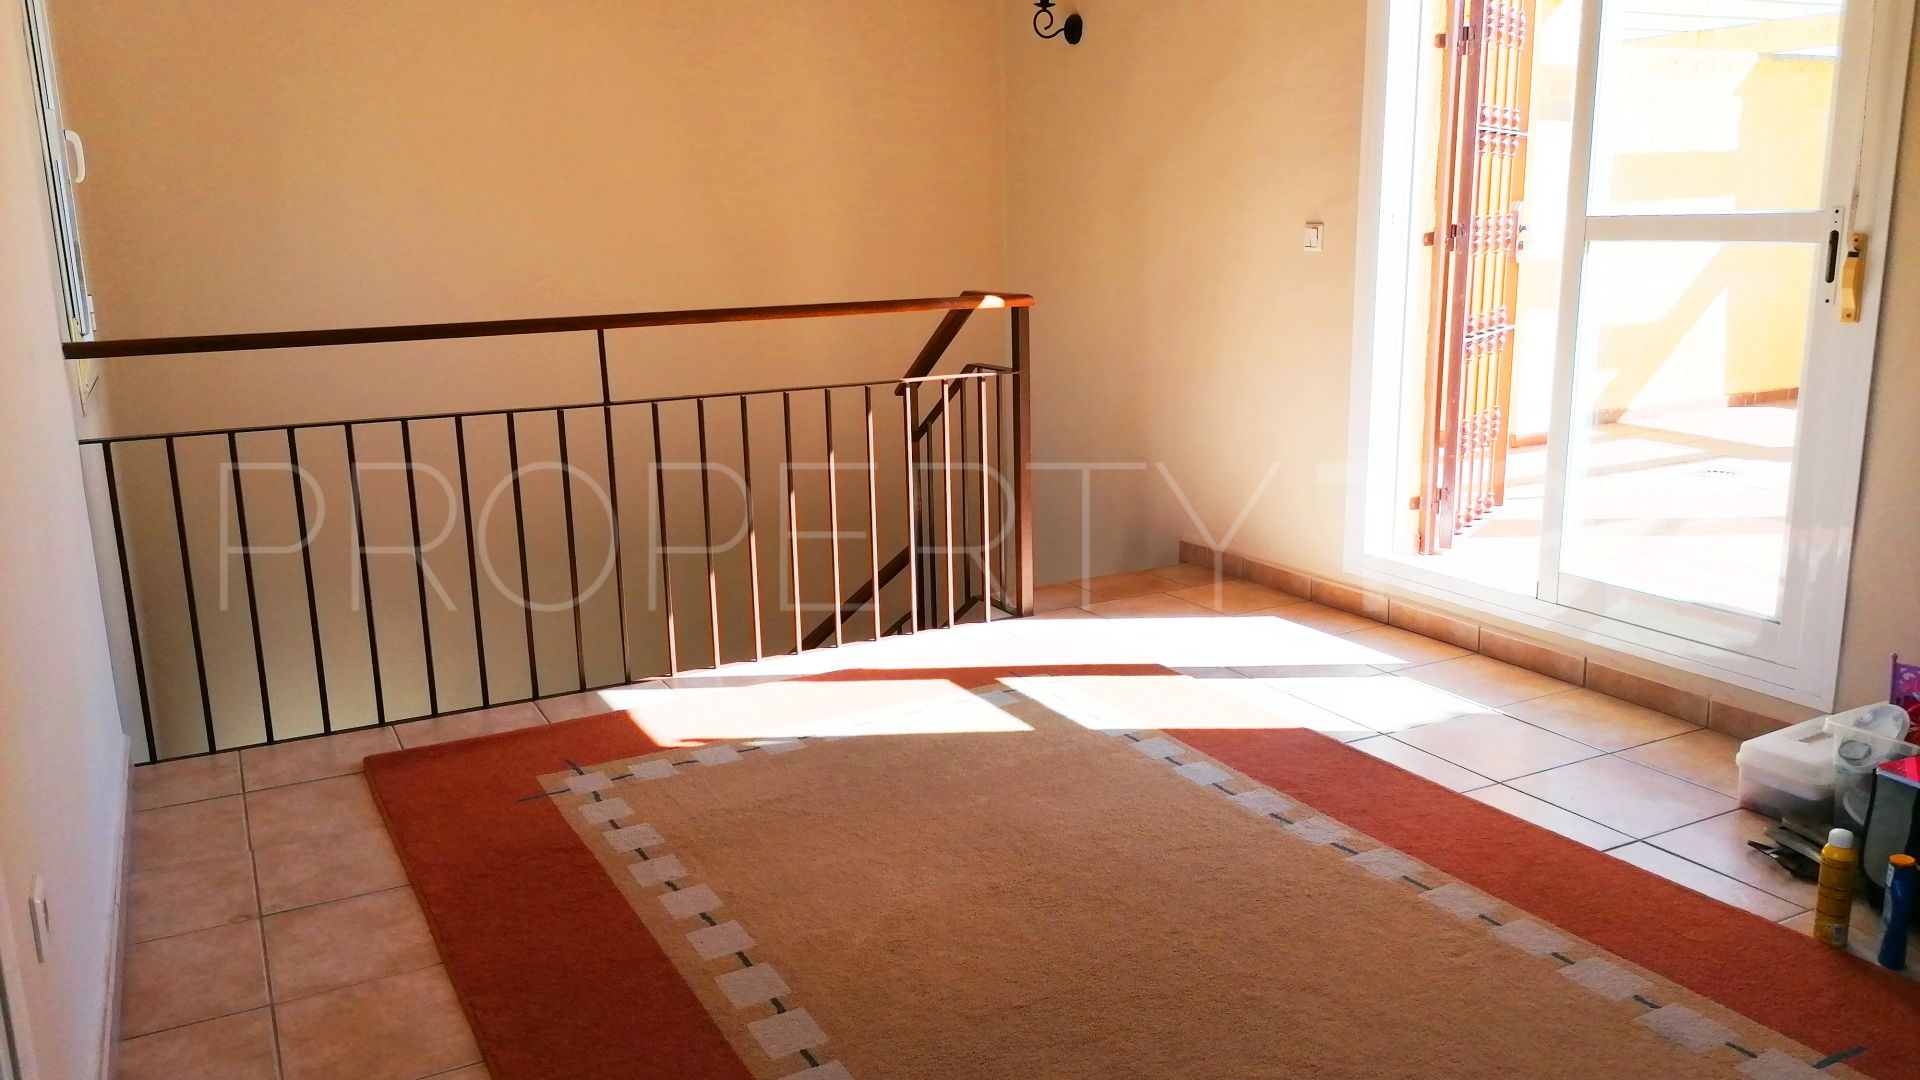 Town house for sale in Sotoserena with 4 bedrooms